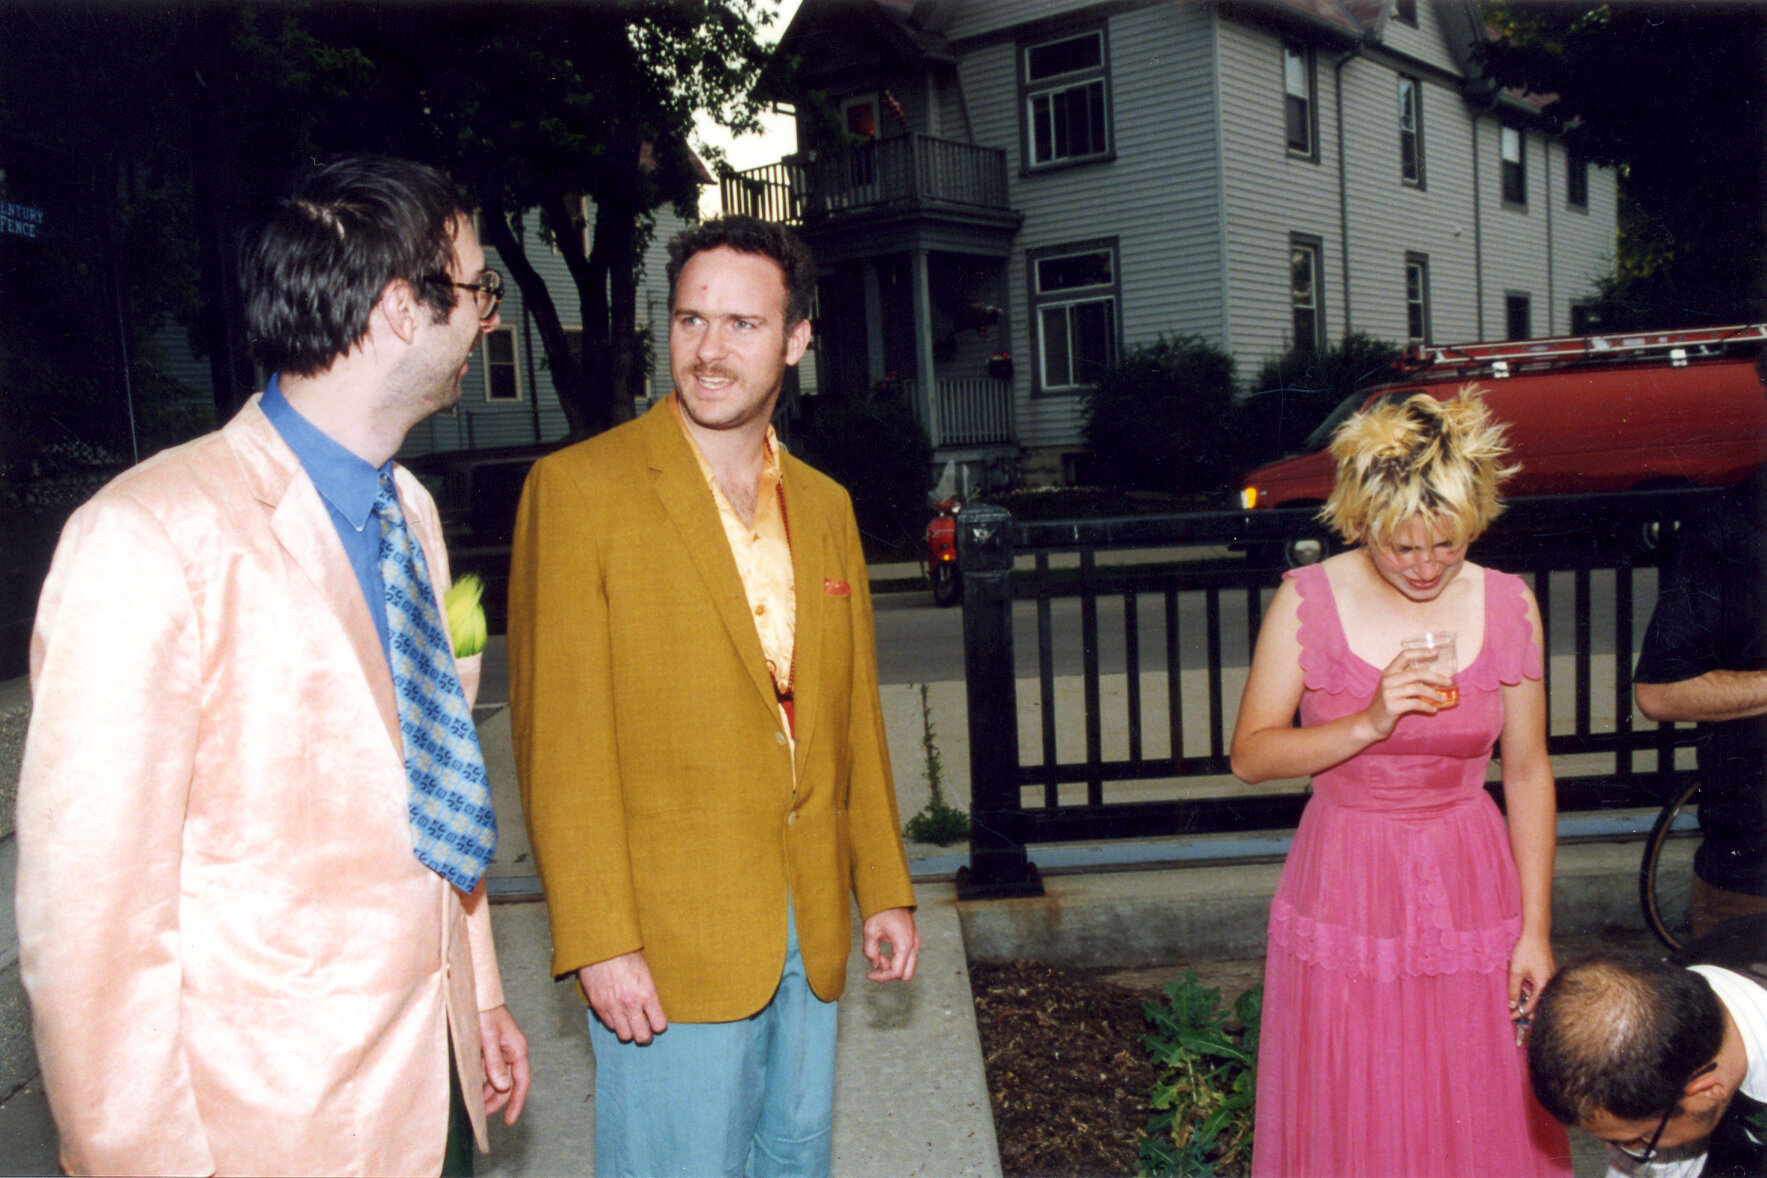 2 men standing next to each other exchange glance, blonde woman in pink dress next to them looks down.